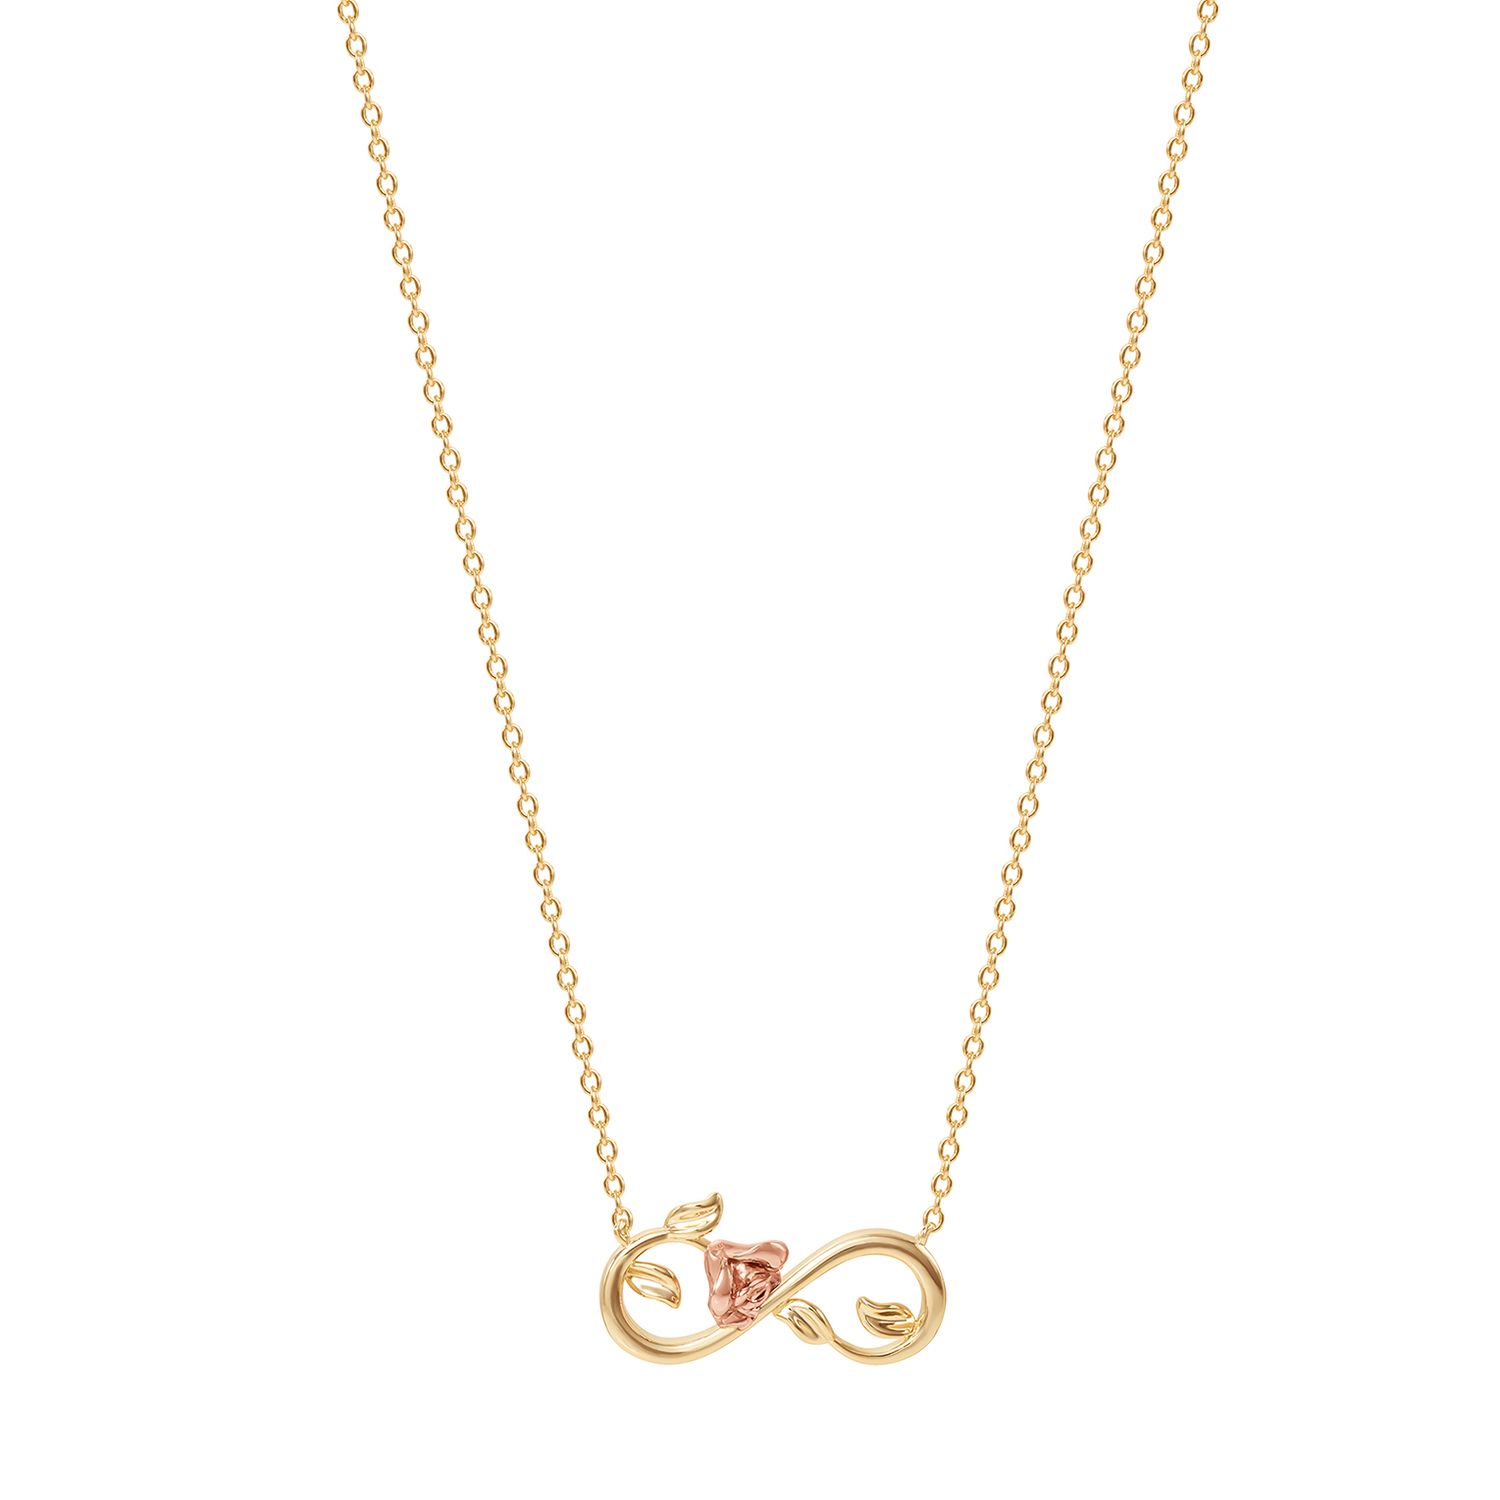 Image for Disney 's Belle Two-Tone 18k Gold Plated Rose Eternity Necklace at Kohl's.